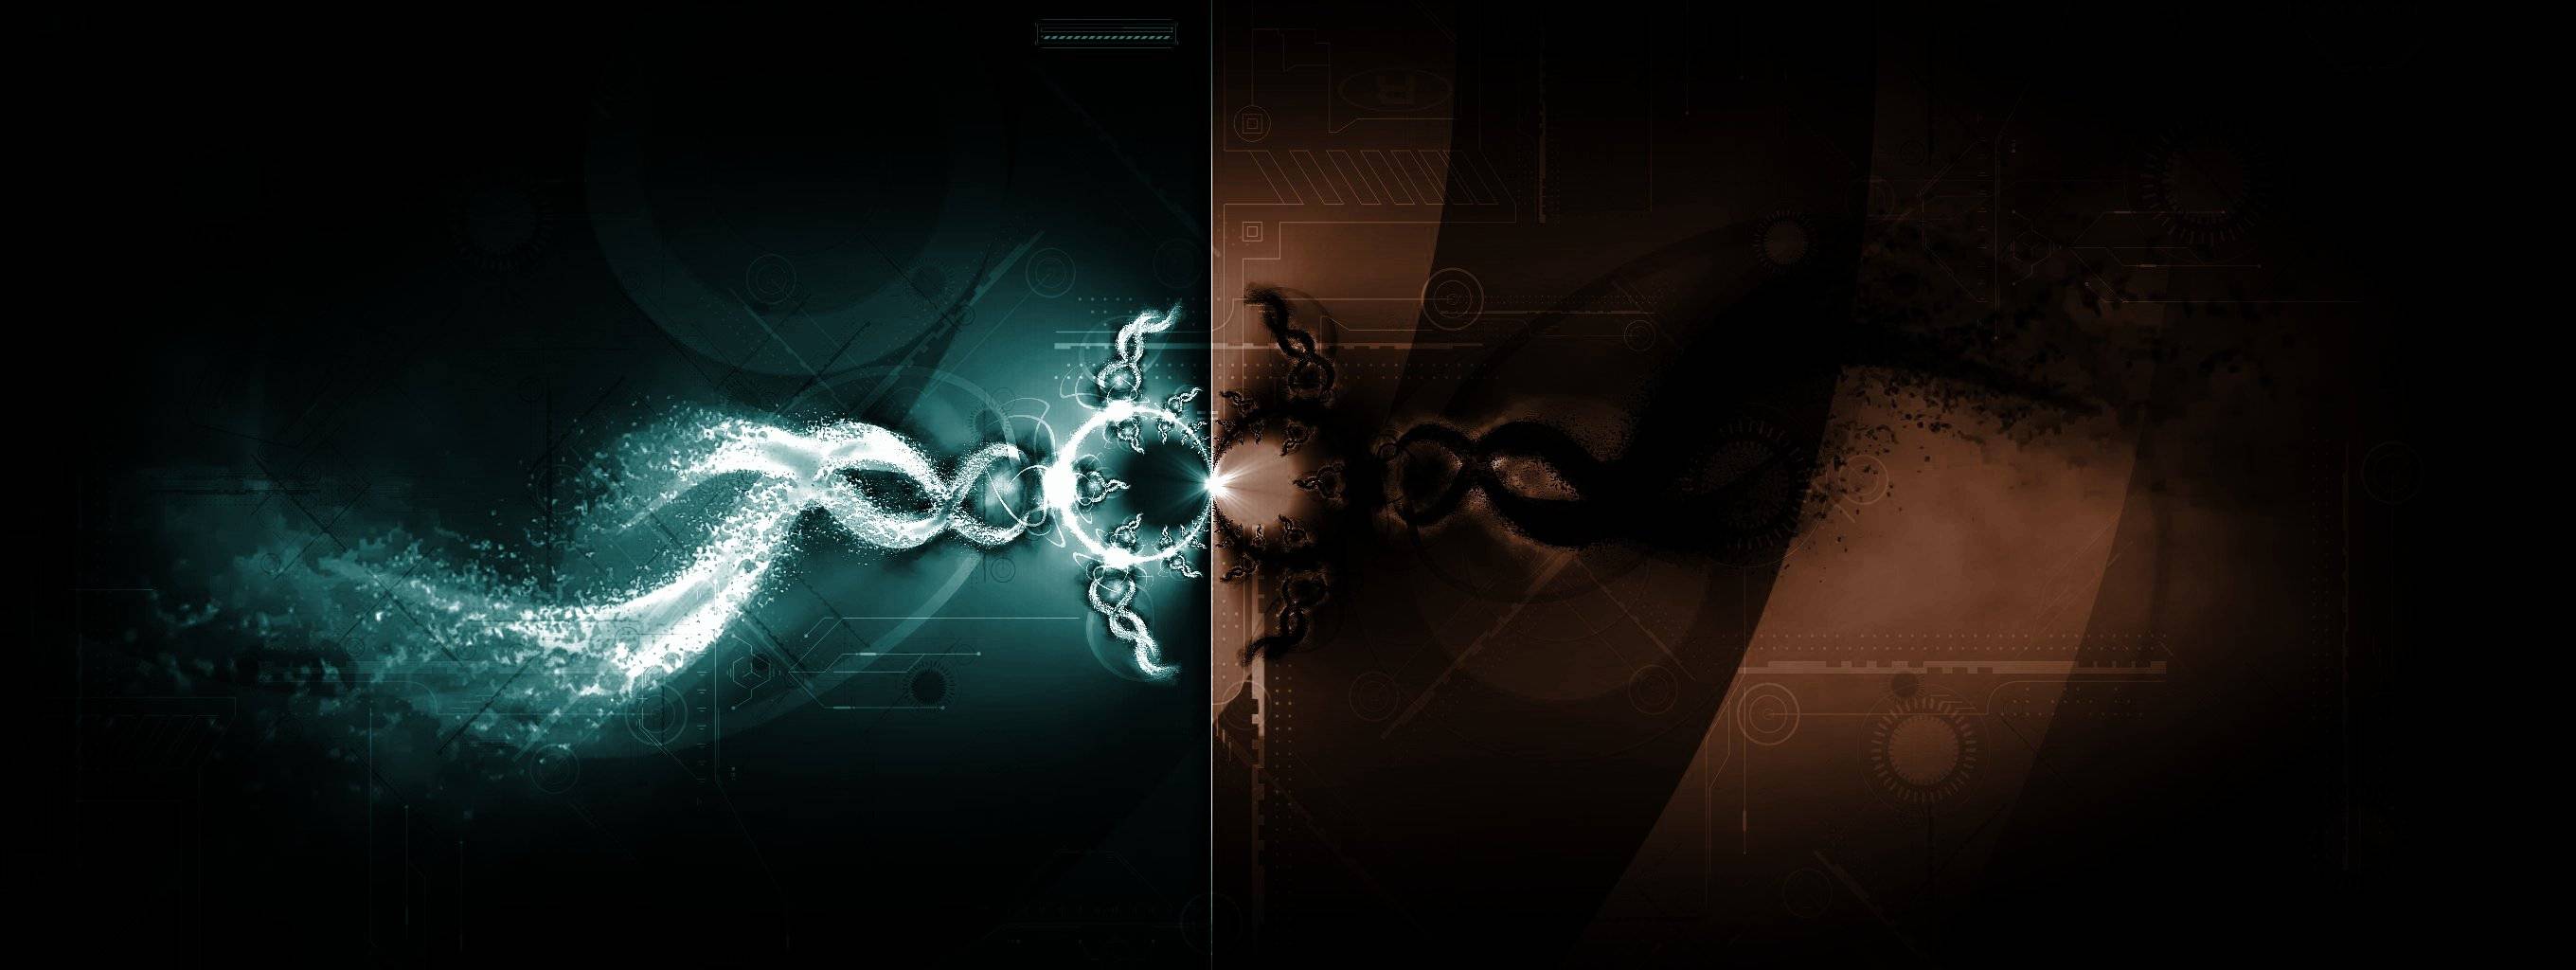 Dual monitor walls wallpaper - - High Quality and other